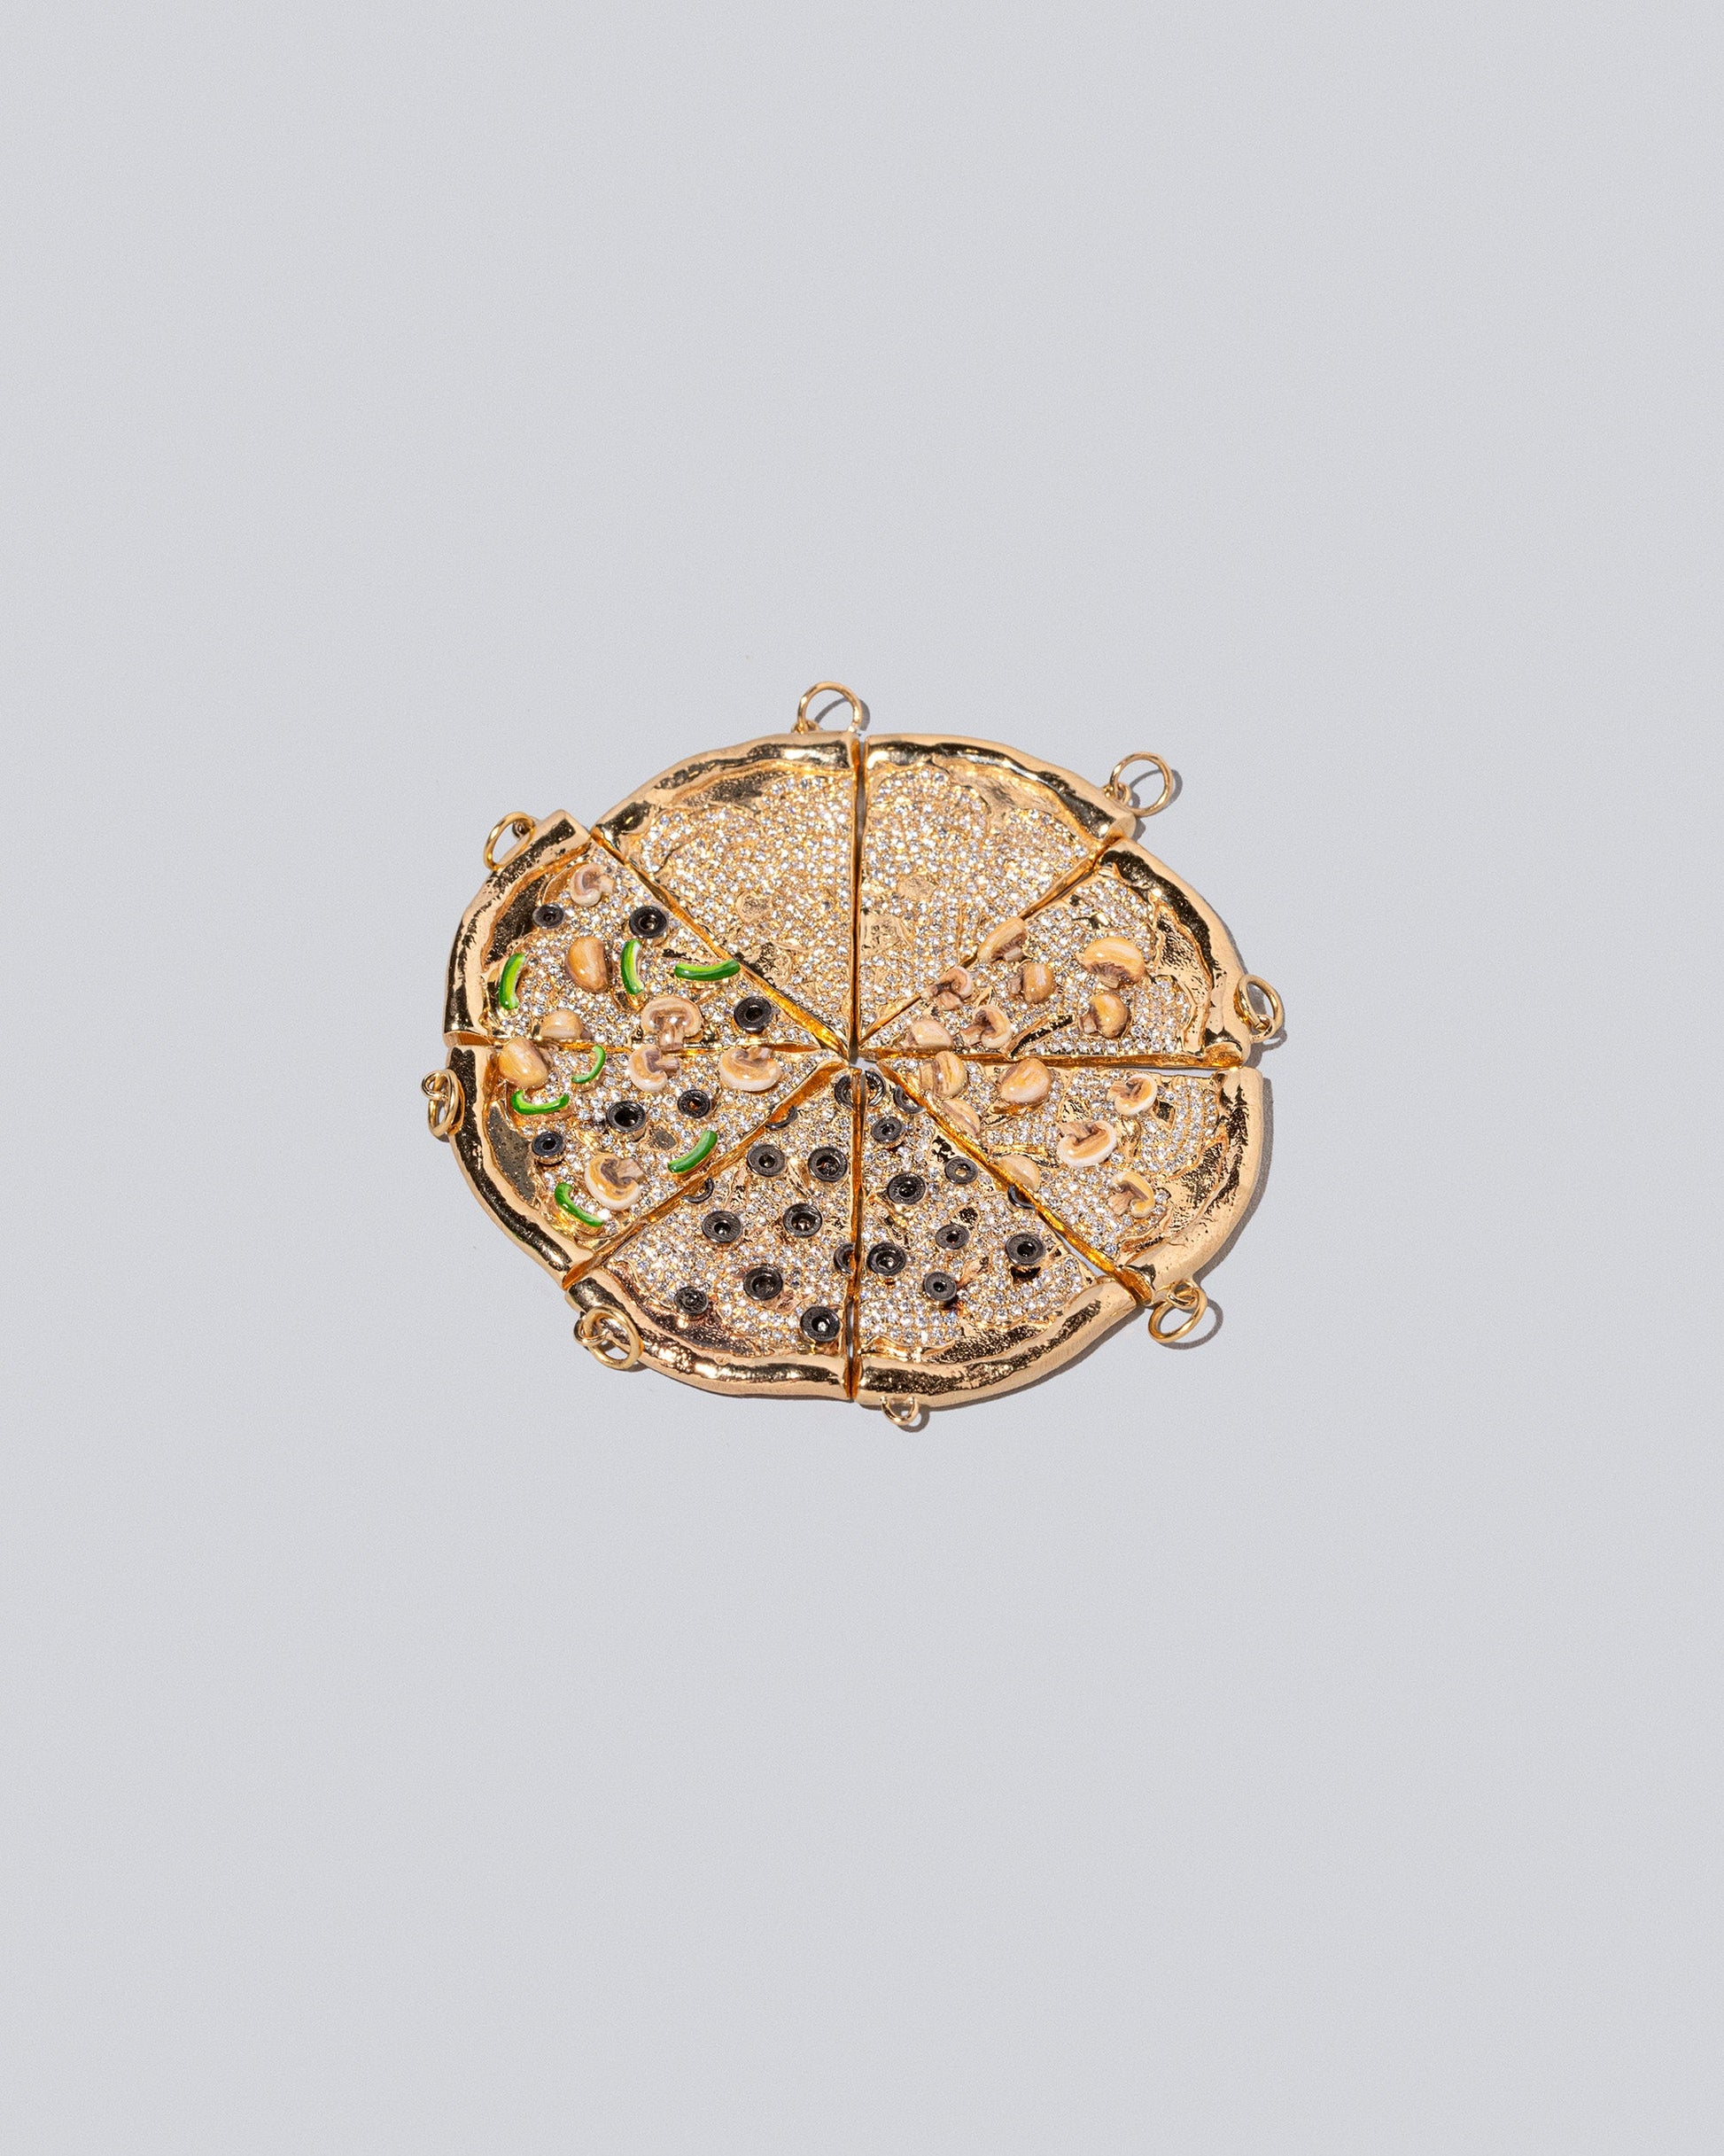 Pizza Charms on light colored background.